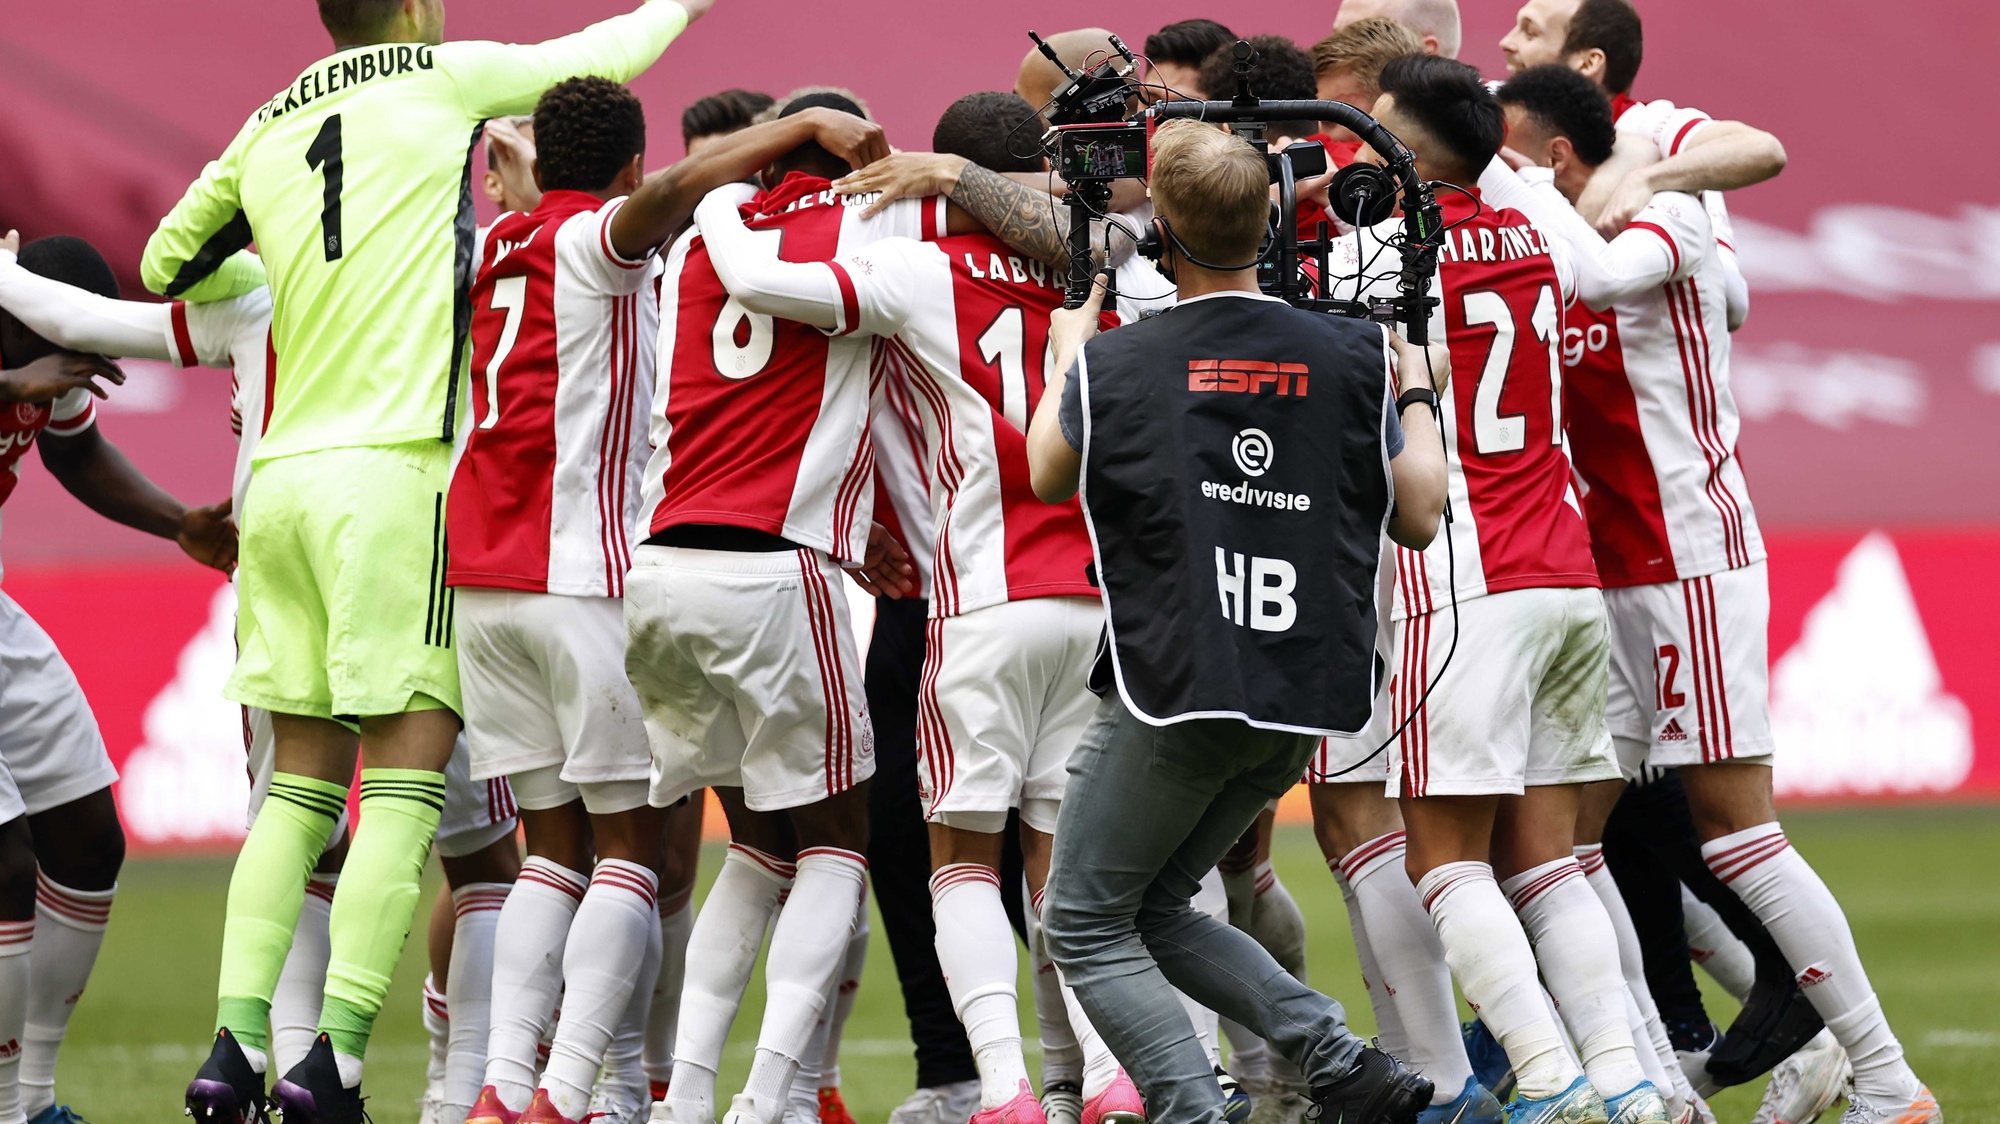 epa09173957 Ajax Amsterdam players celebrate the national championship title after winning the Dutch Eredivisie match between Ajax Amsterdam and FC Emmen at the Johan Cruijff Arena in Amsterdam, Netherlands, 02 May 2021.  EPA/MAURICE VAN STEEN